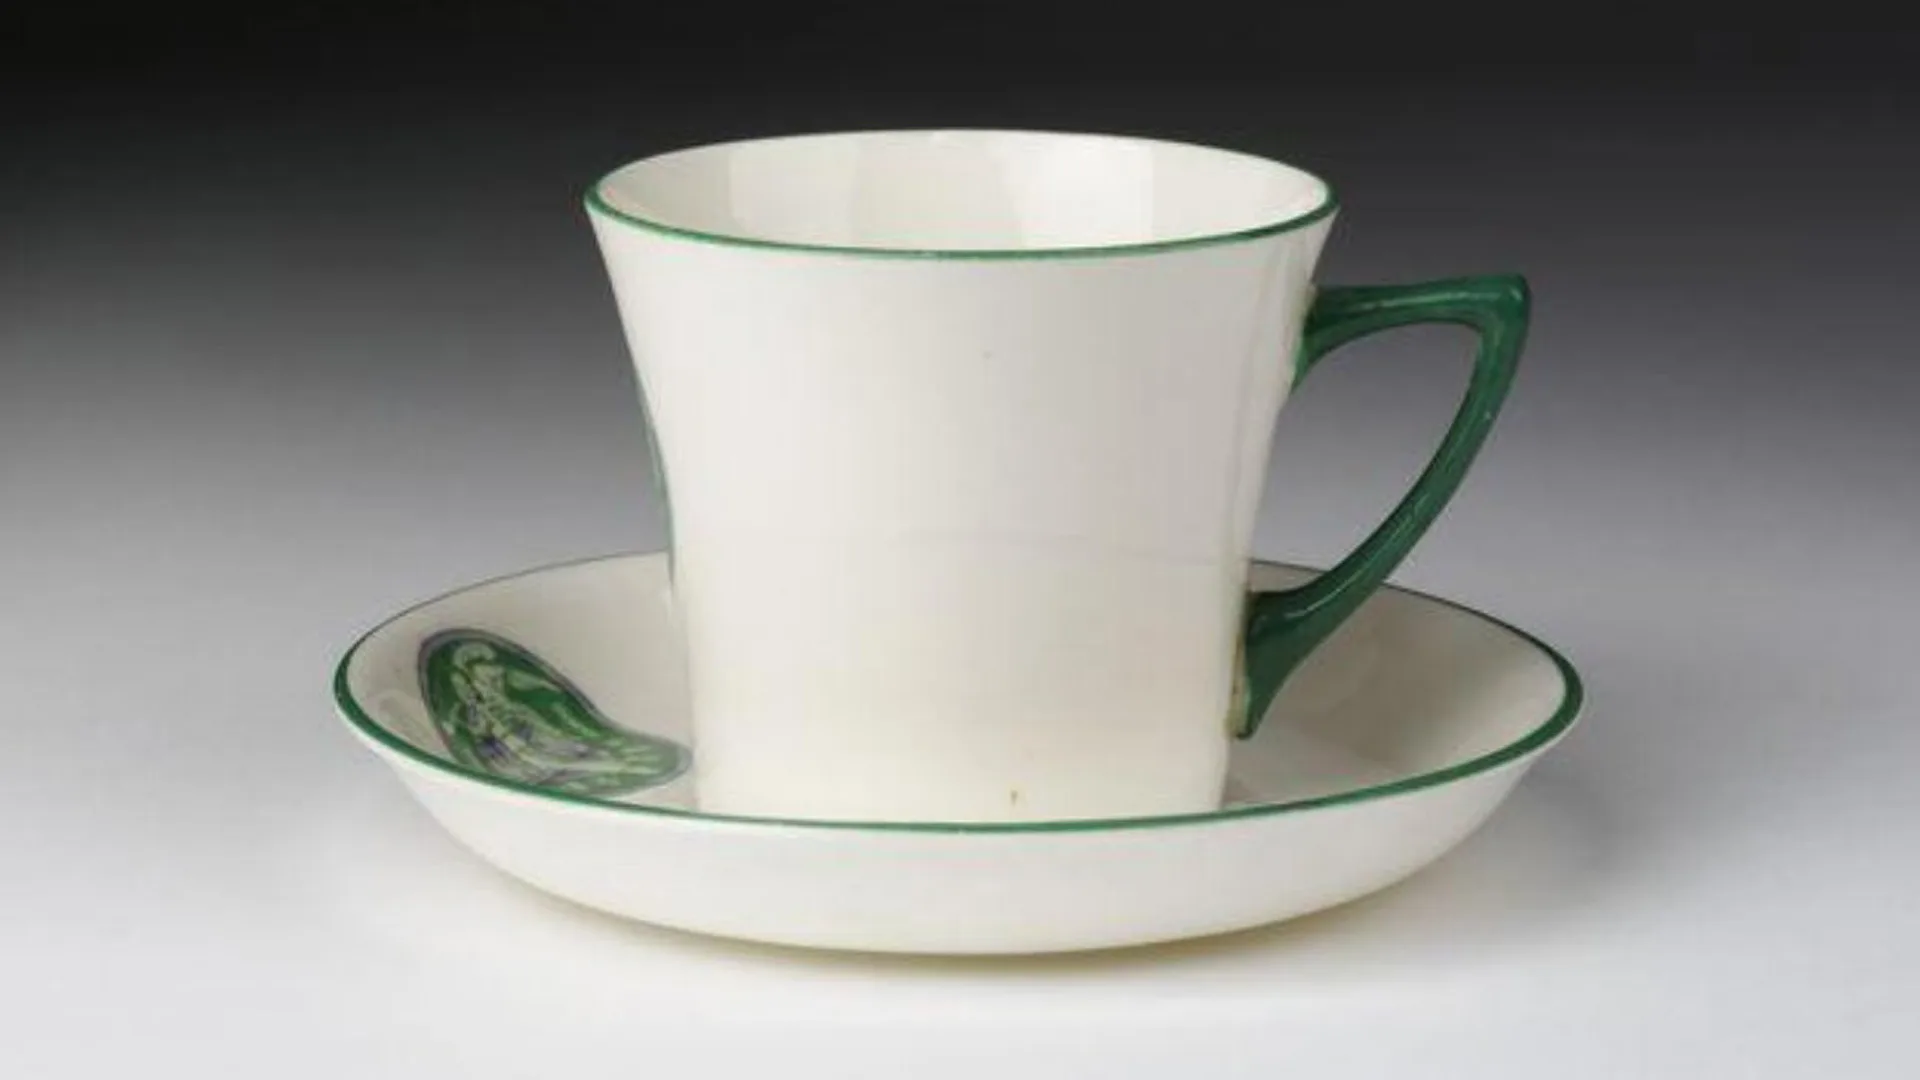 A photograph of a teacup and saucer designed by Sylvia Pankhurst